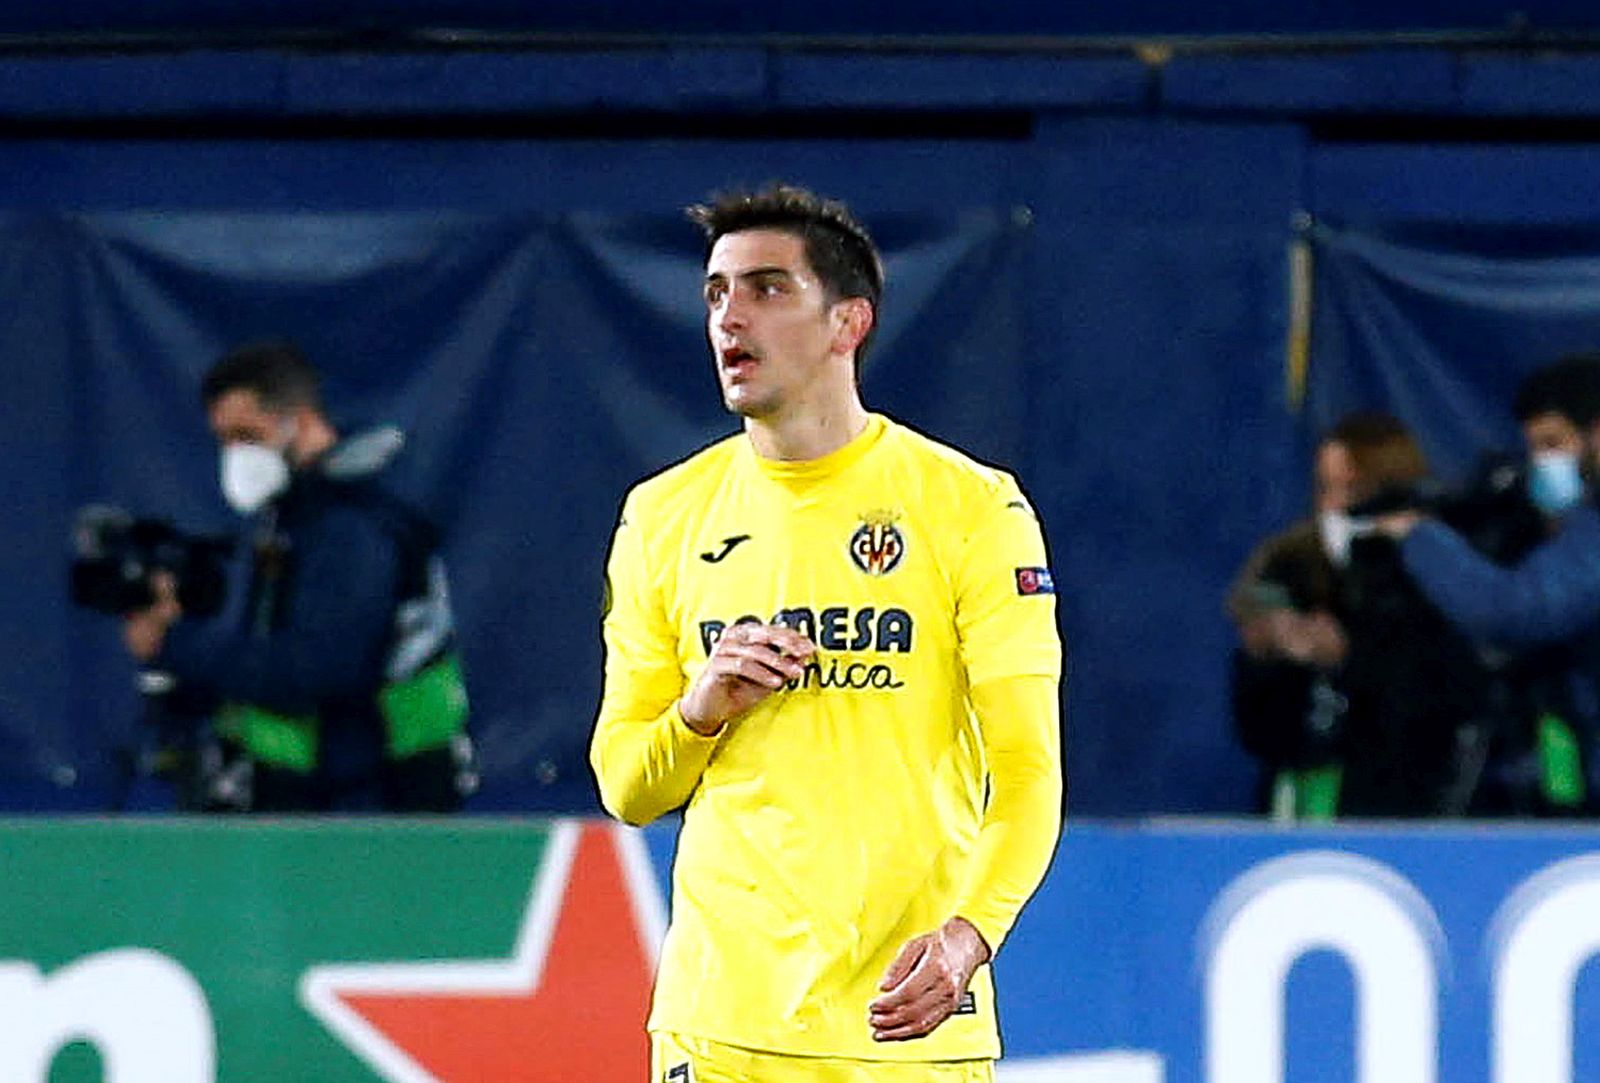 epa09036387 Villarreal's Gerard Moreno reacts after scoring the 1-1 equalizer during the UEFA Europa League round of 32, second leg soccer match between Villarreal CF and FC Salzburg at La Ceramica stadium in Villarreal, Spain, 25 February 2021.  EPA/Domenech Castello